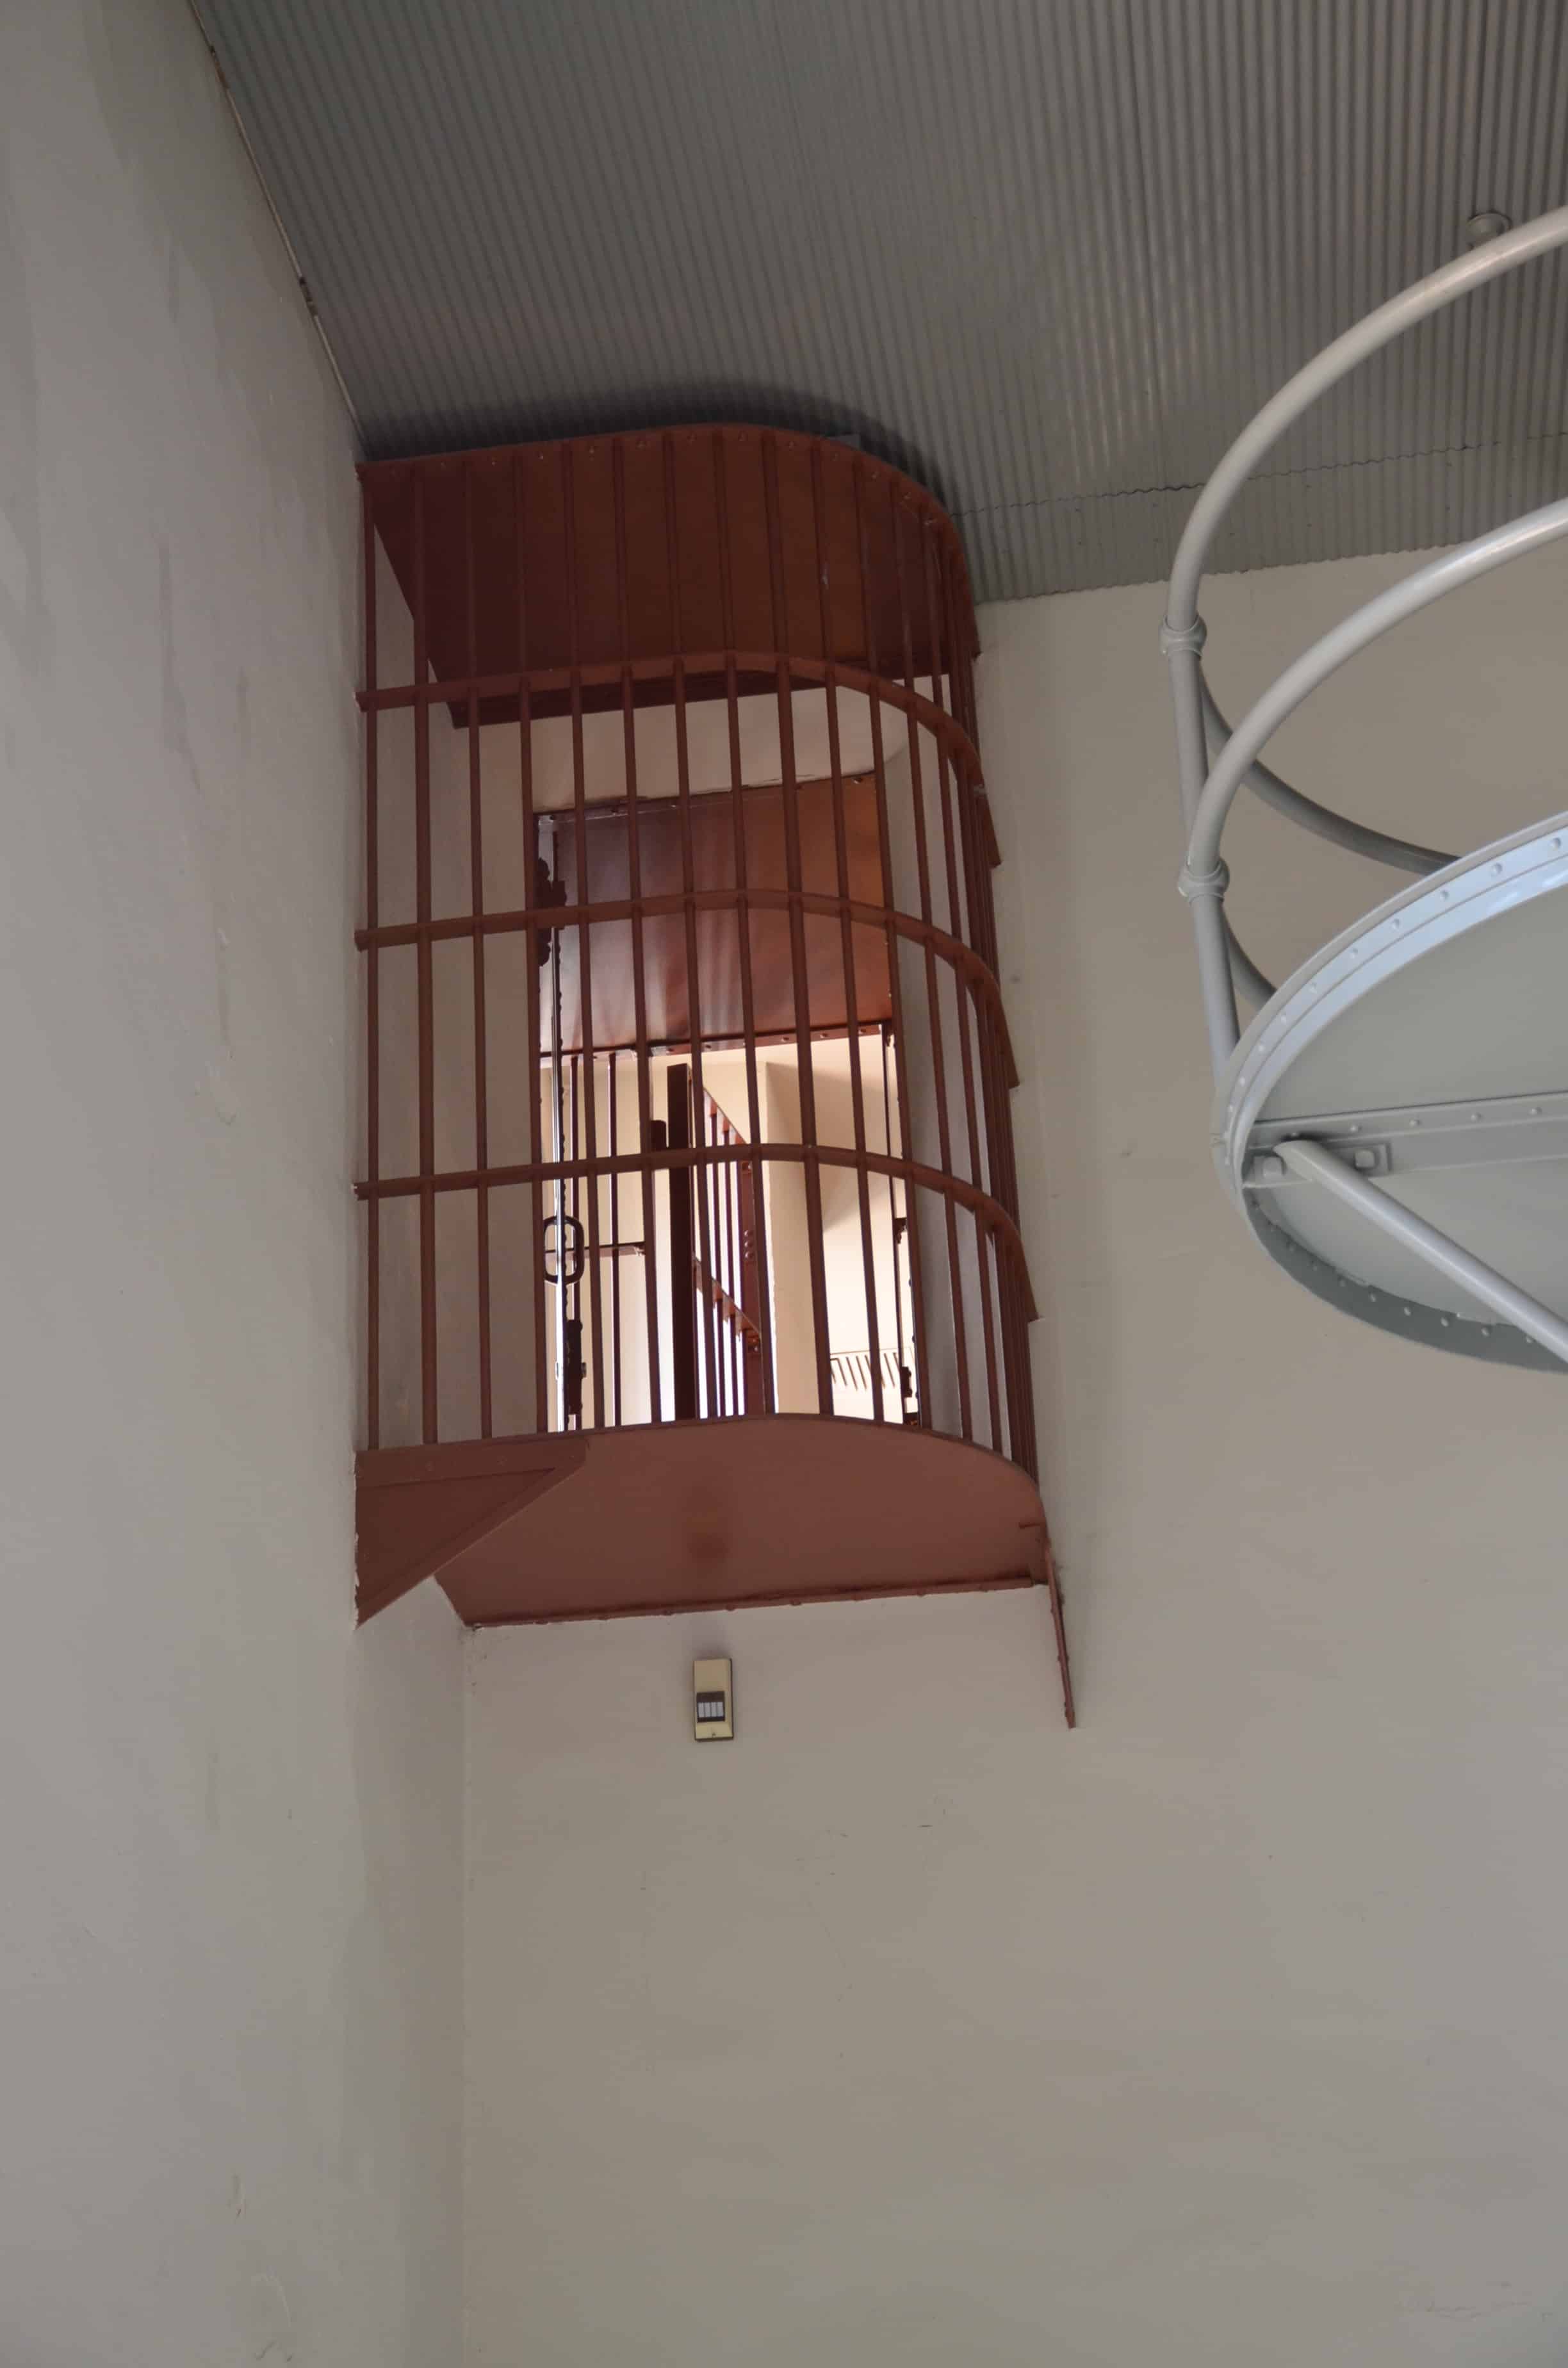 Guard cage at Wyoming Territorial Prison State Historic Site in Laramie